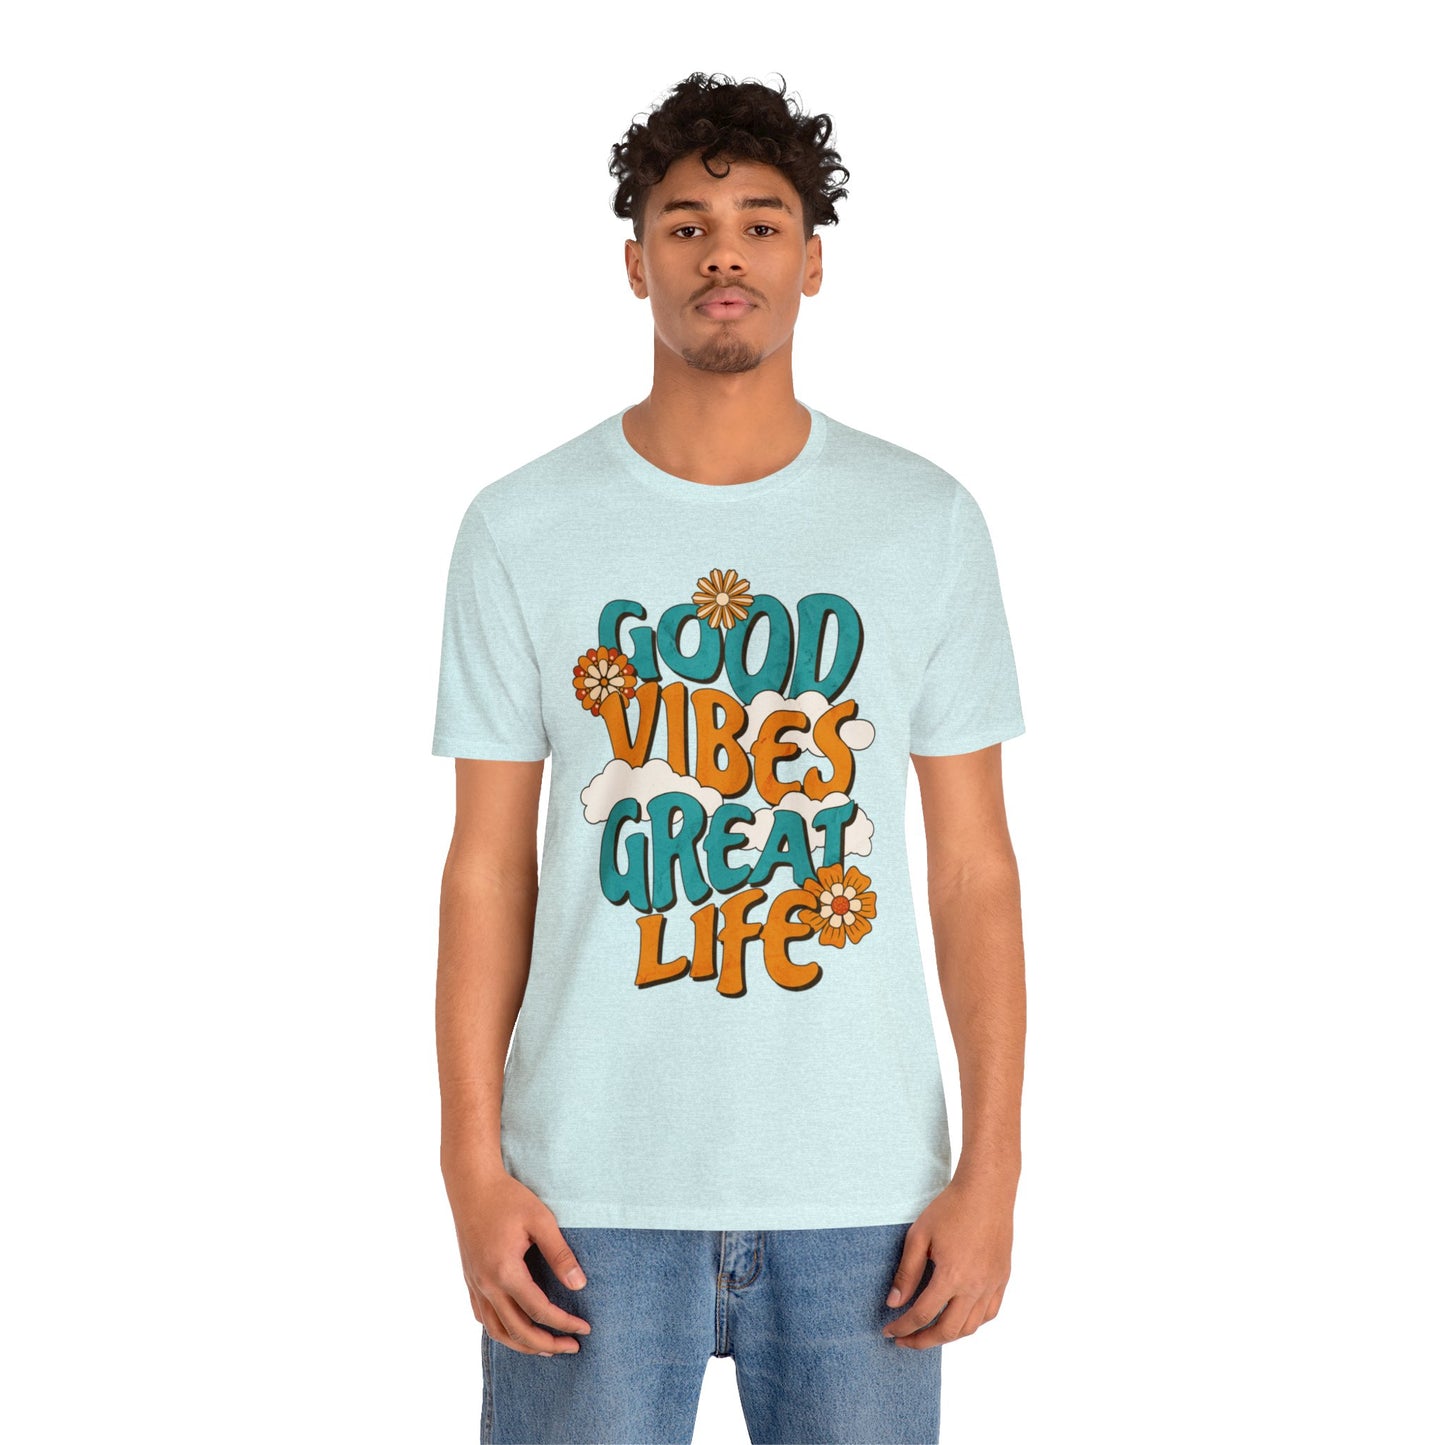 Good vibes Great life